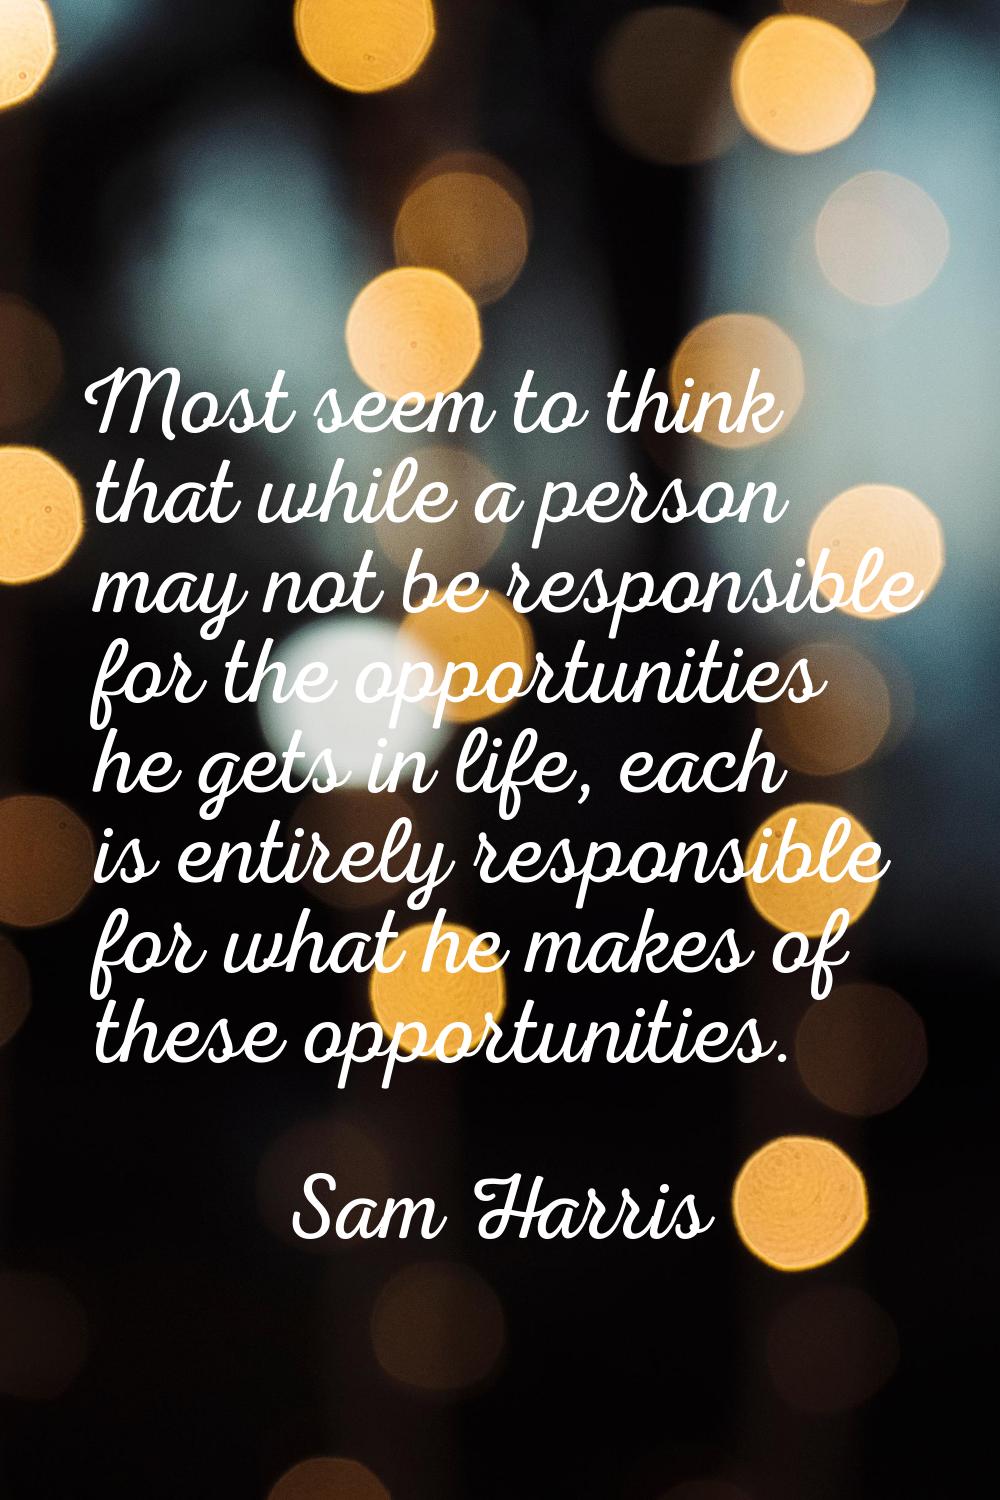 Most seem to think that while a person may not be responsible for the opportunities he gets in life